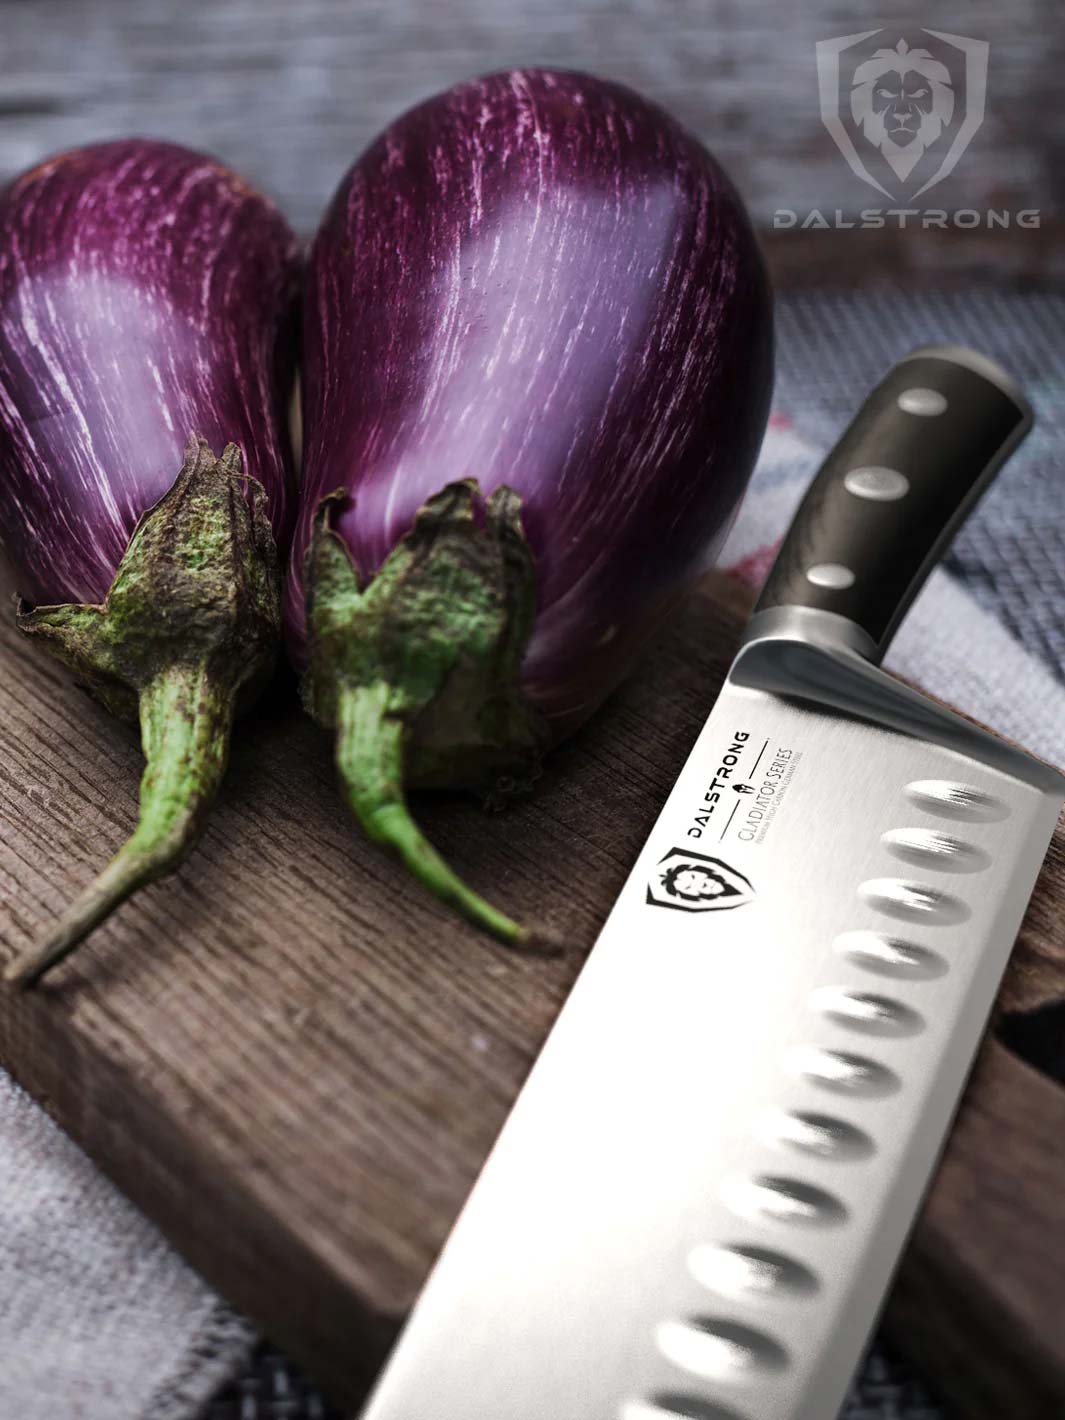 Dalstrong gladiator series 7 inch nakiri knife with black handle and two eggplants on a wooden cutting board.